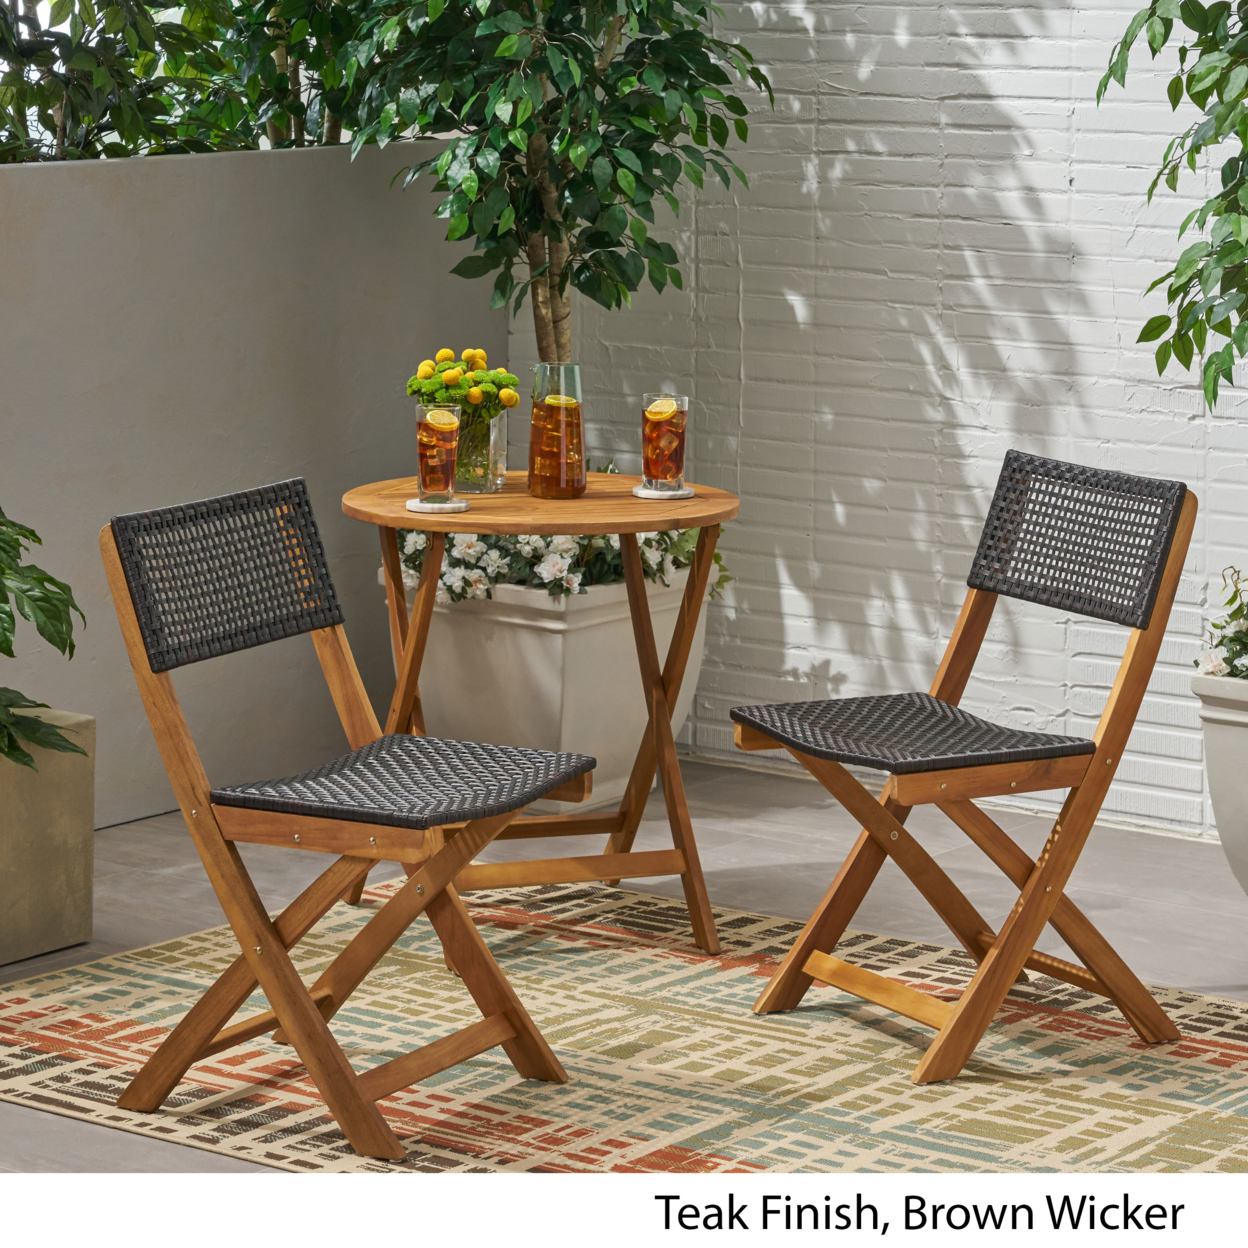 Ida Outdoor Acacia Wood Foldable Bistro Chairs With Wicker Seating (Set Of 2) - Teak Finish + Brown Wicker